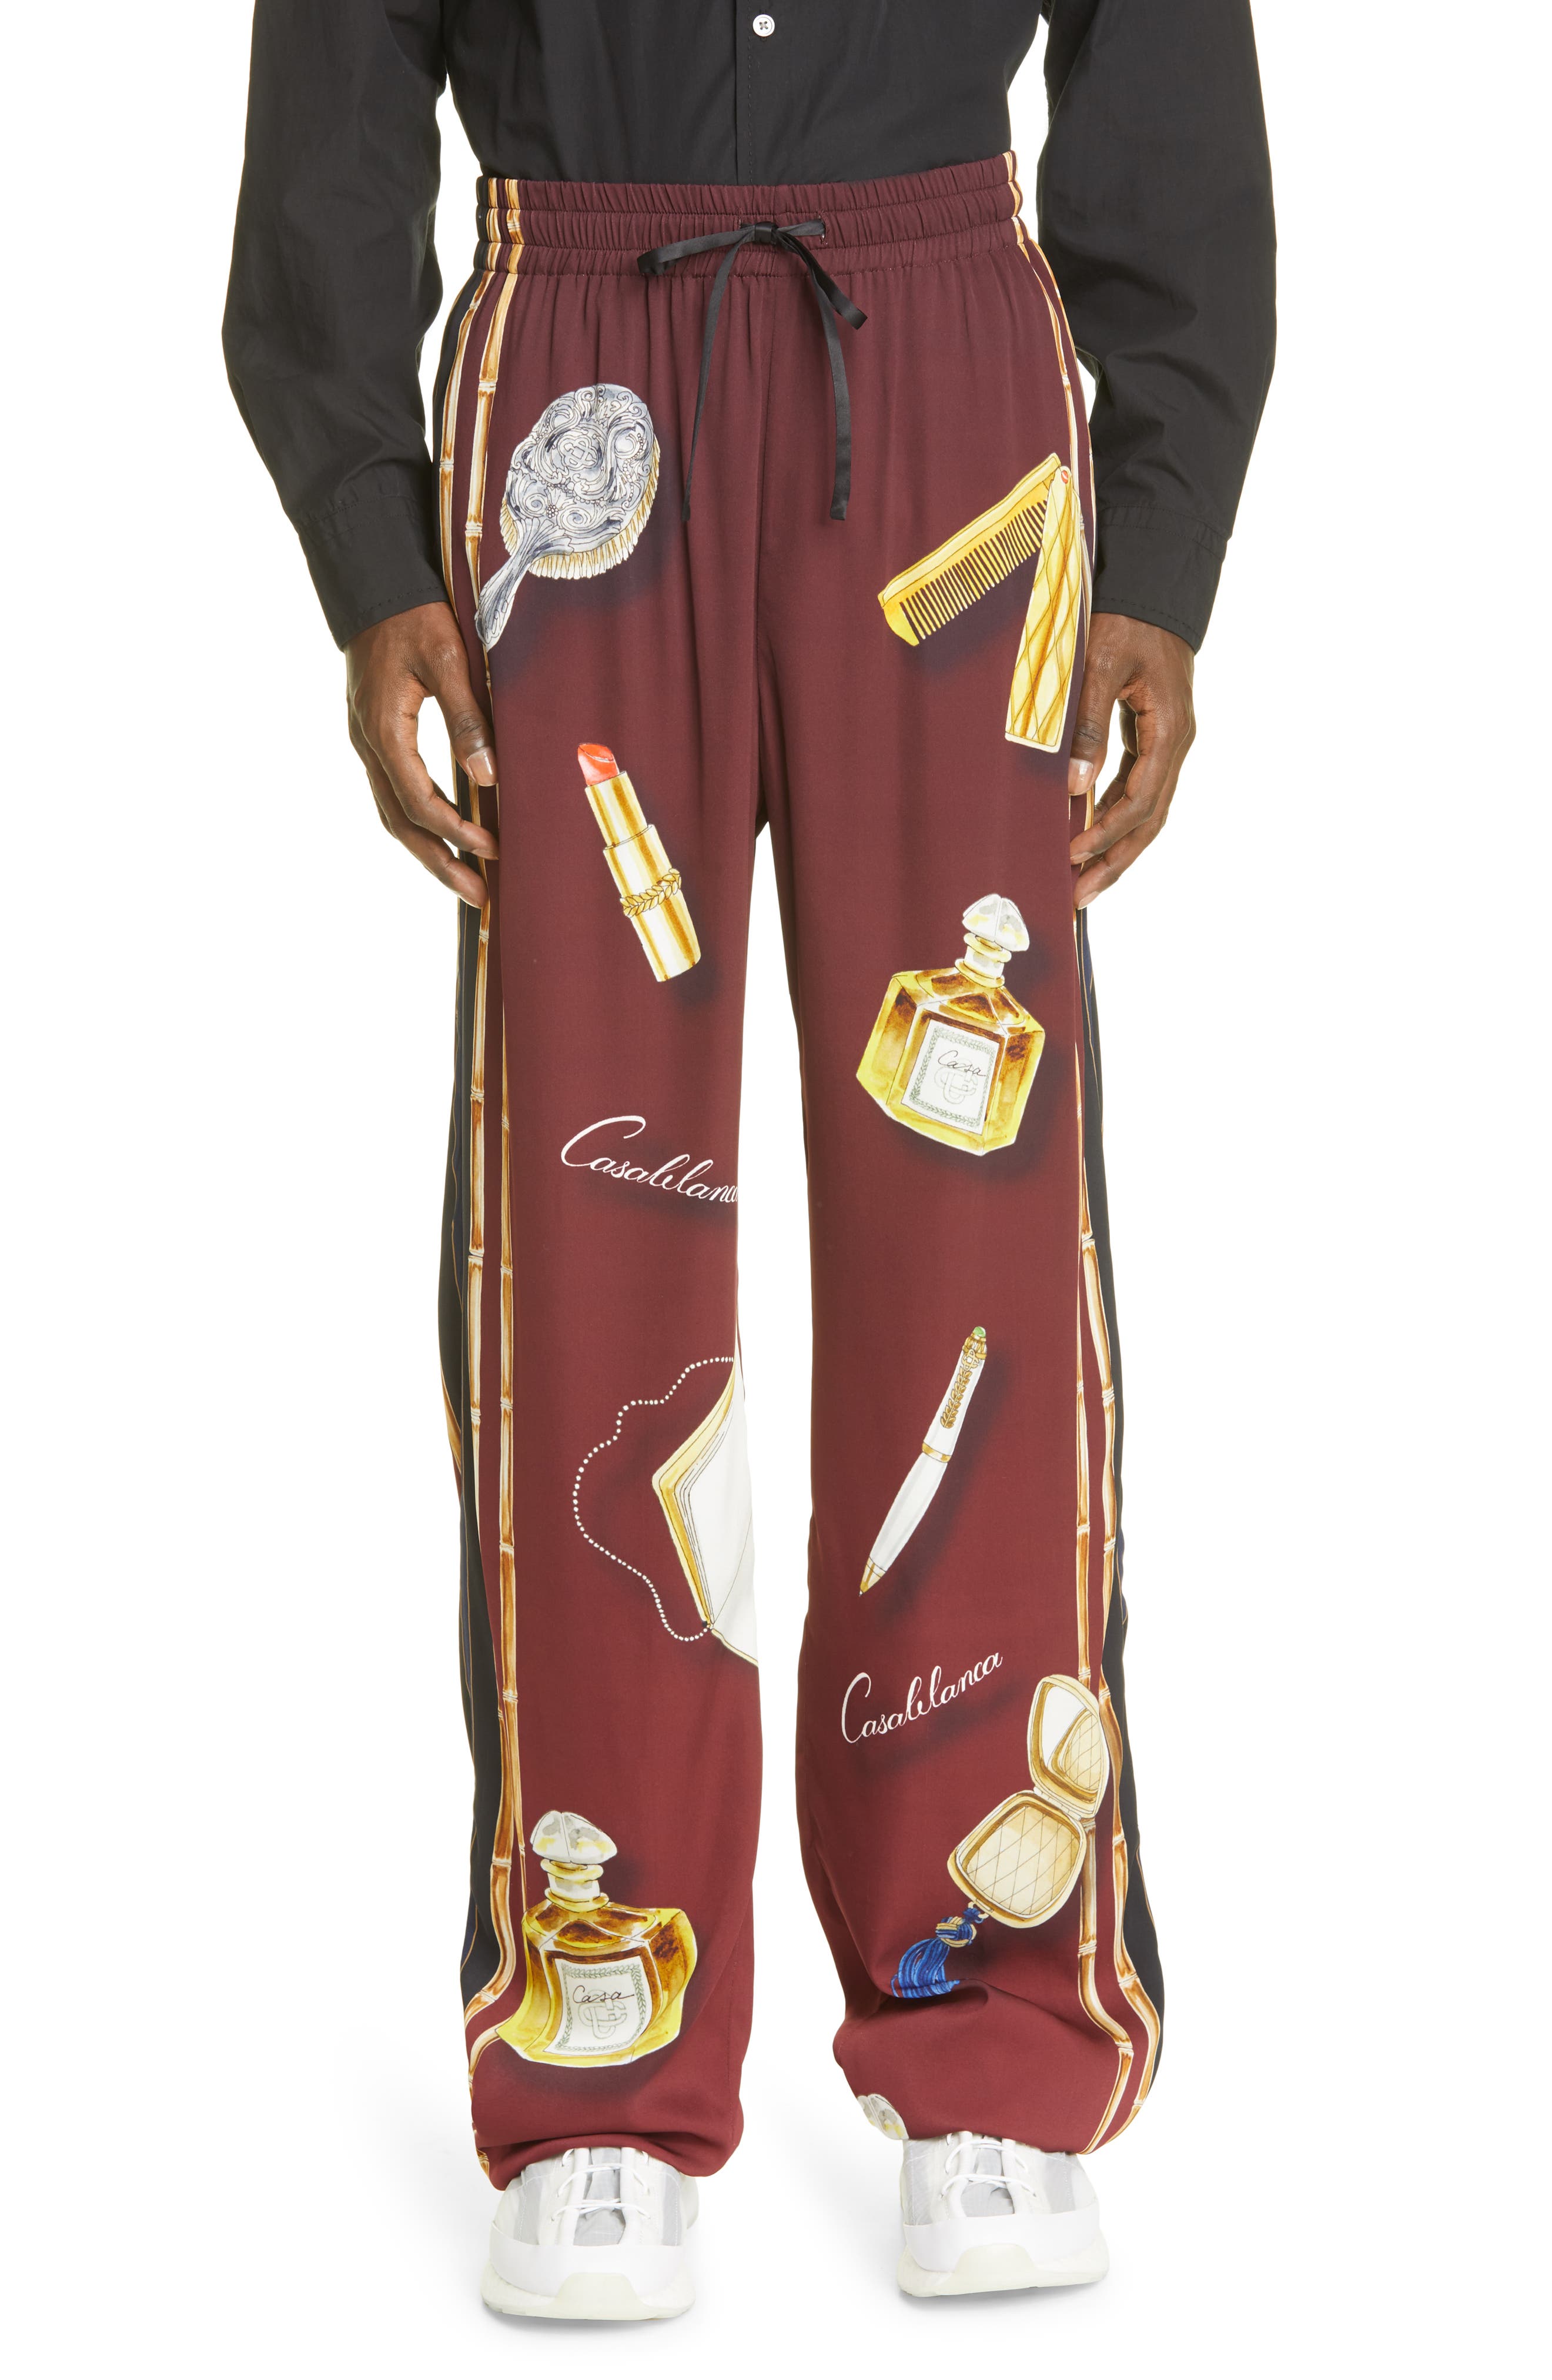 Casablanca Print Pajama Pants in Coiffeuse at Nordstrom, Size Large